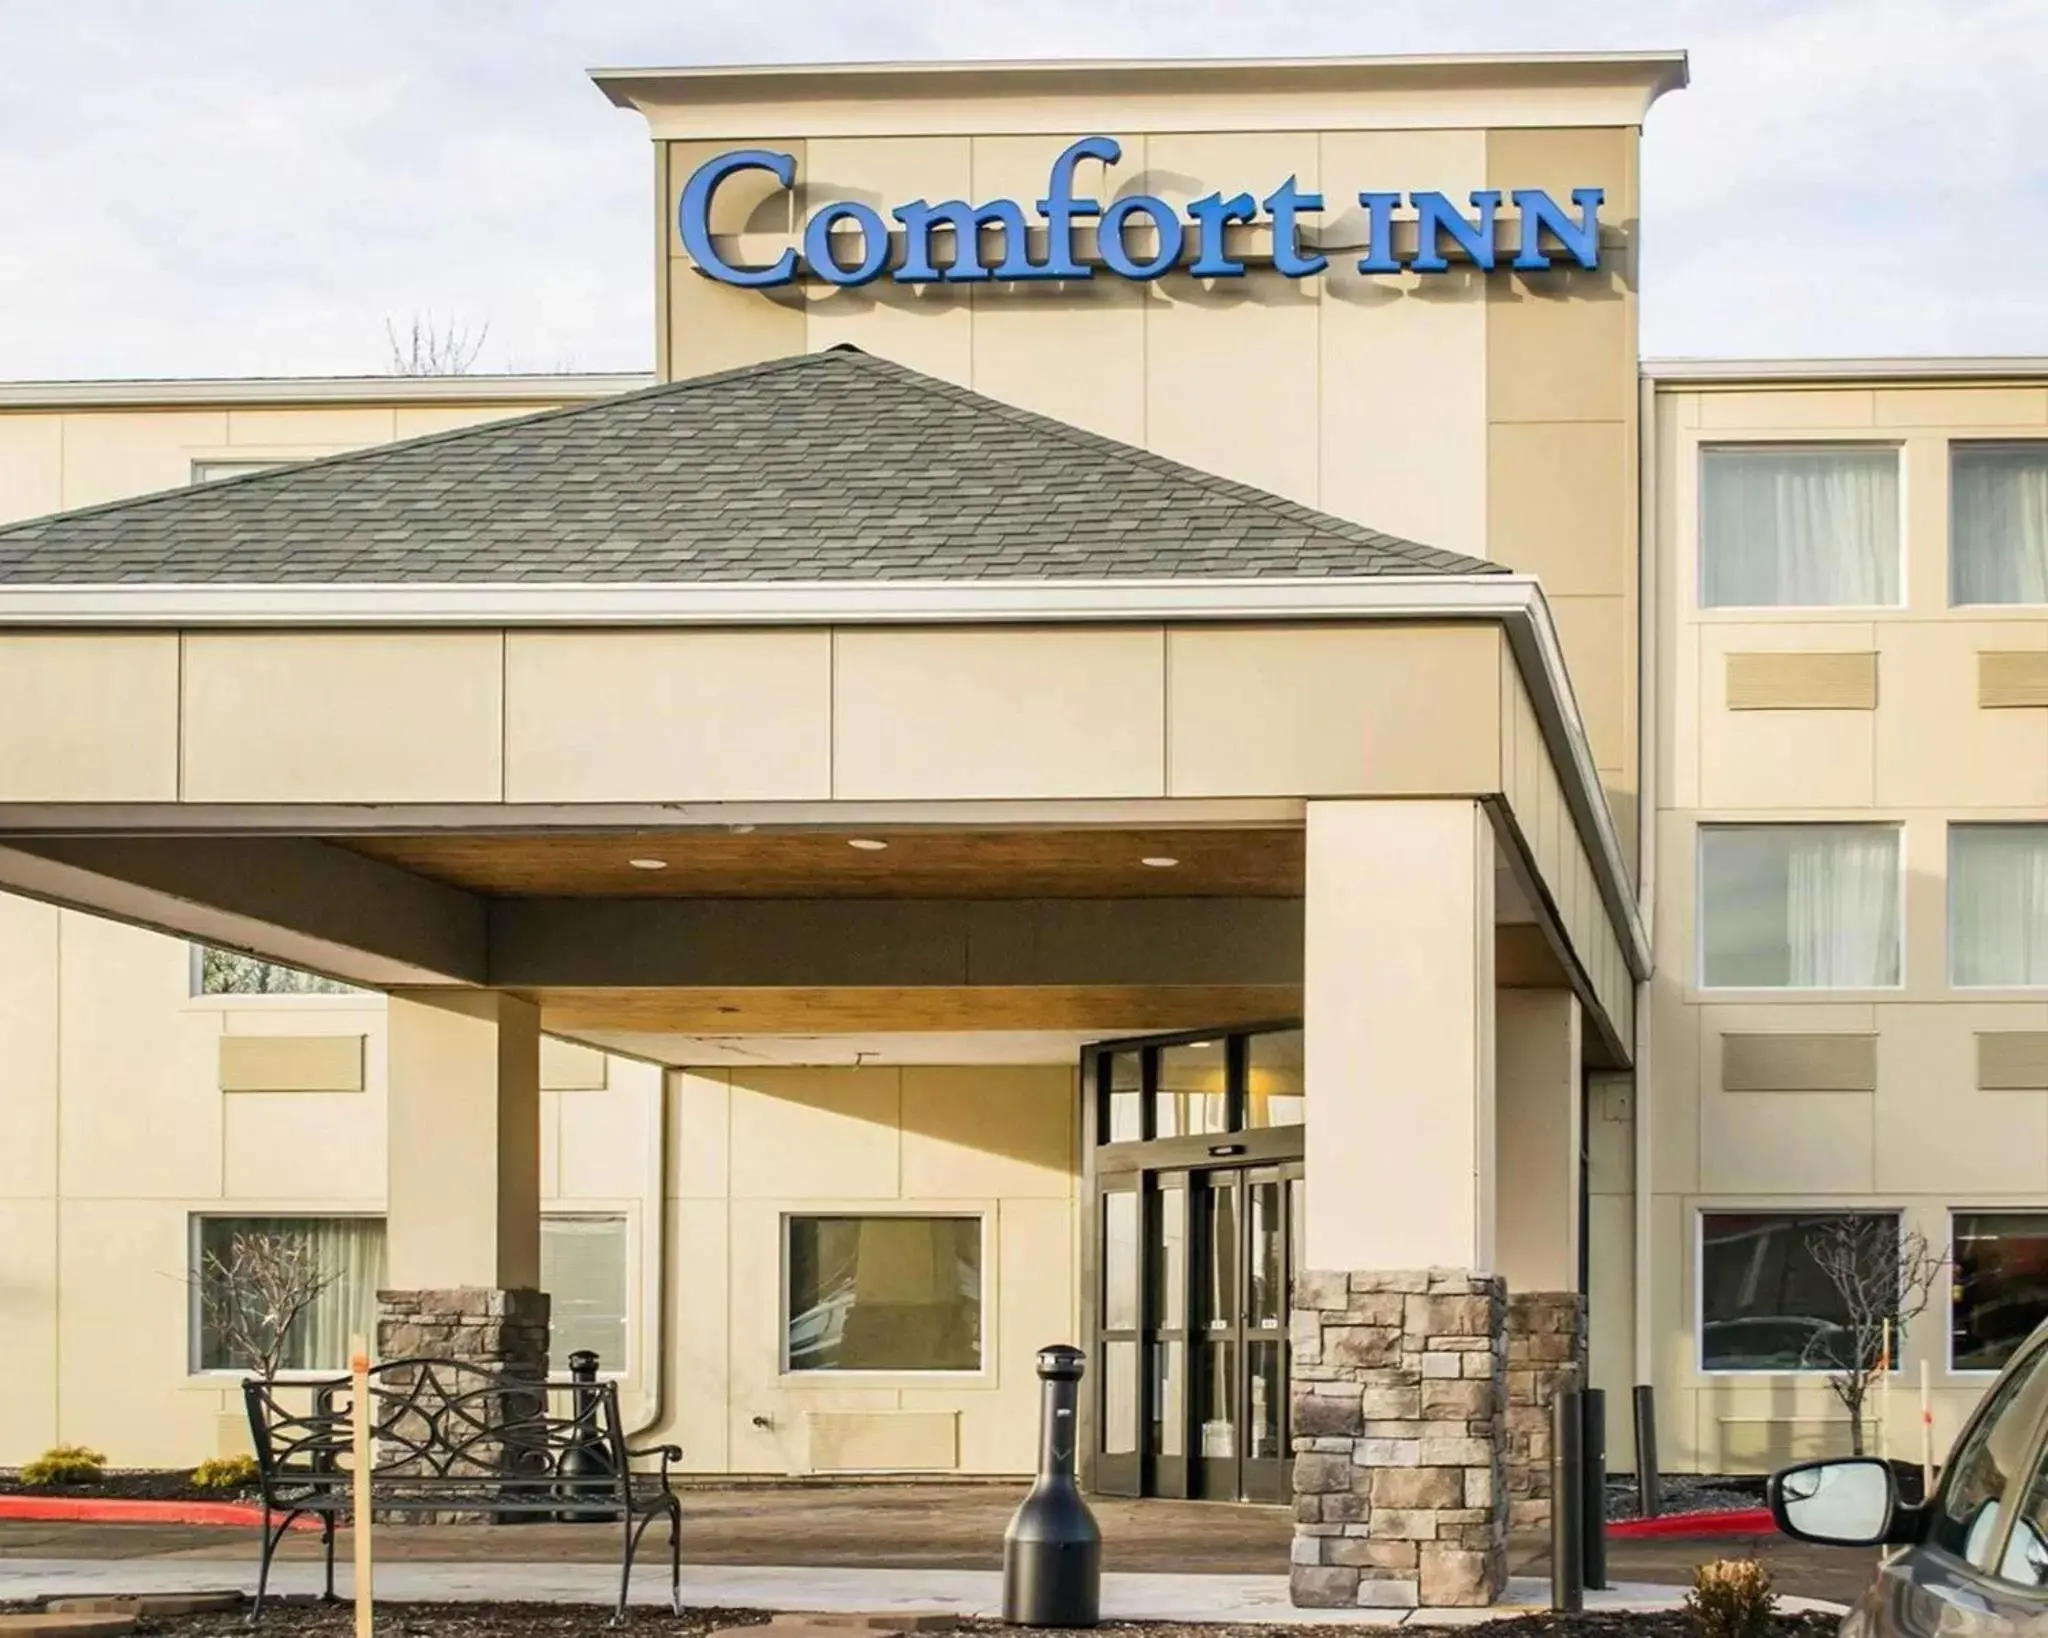 Property building in Comfort Inn Mayfield Heights Cleveland East